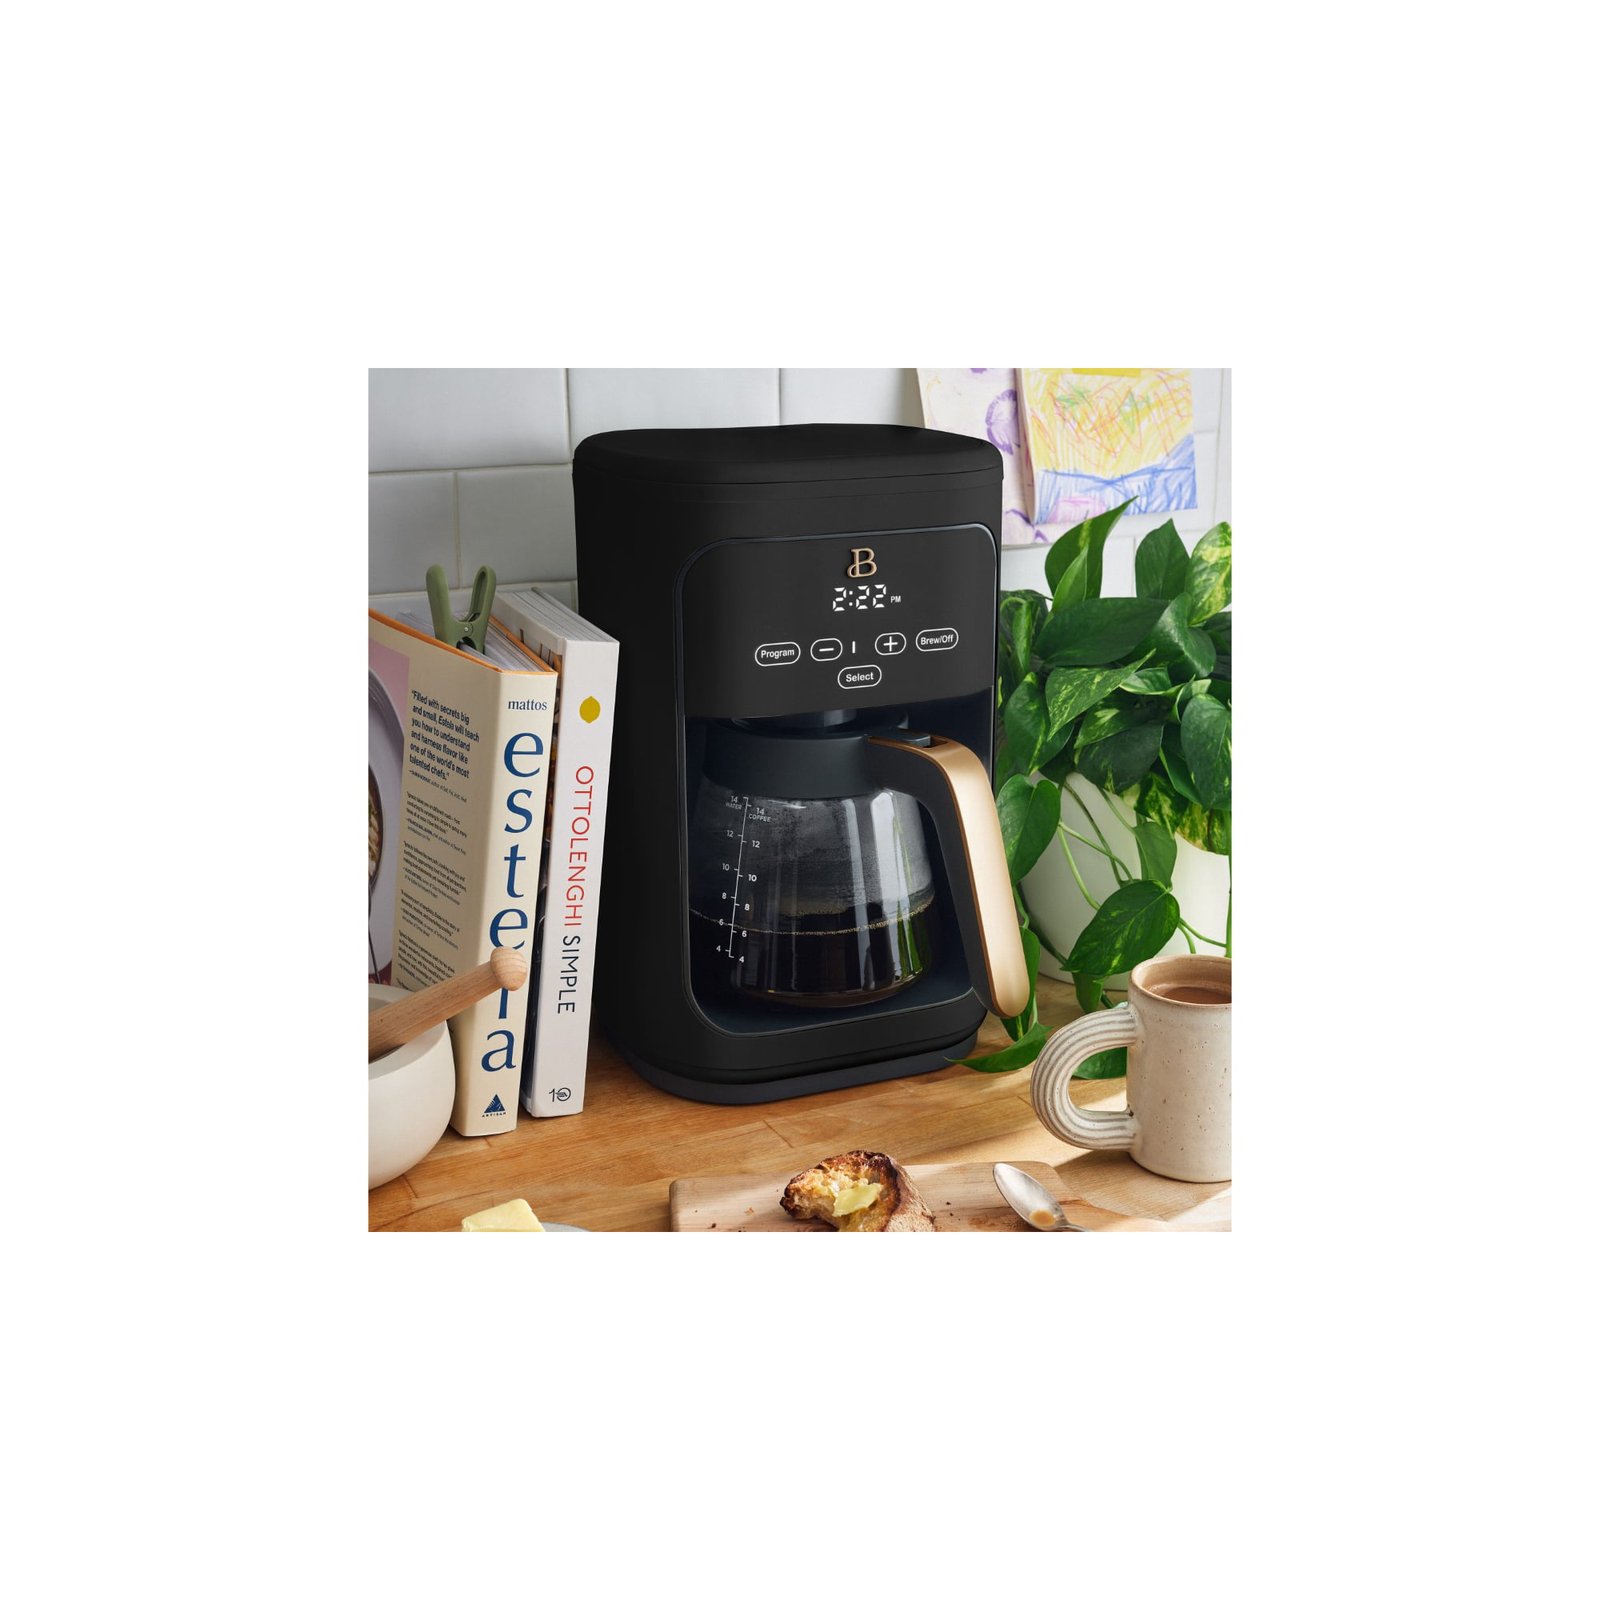 Beautiful 14-Cup Programmable Drip Coffee Maker with Touch